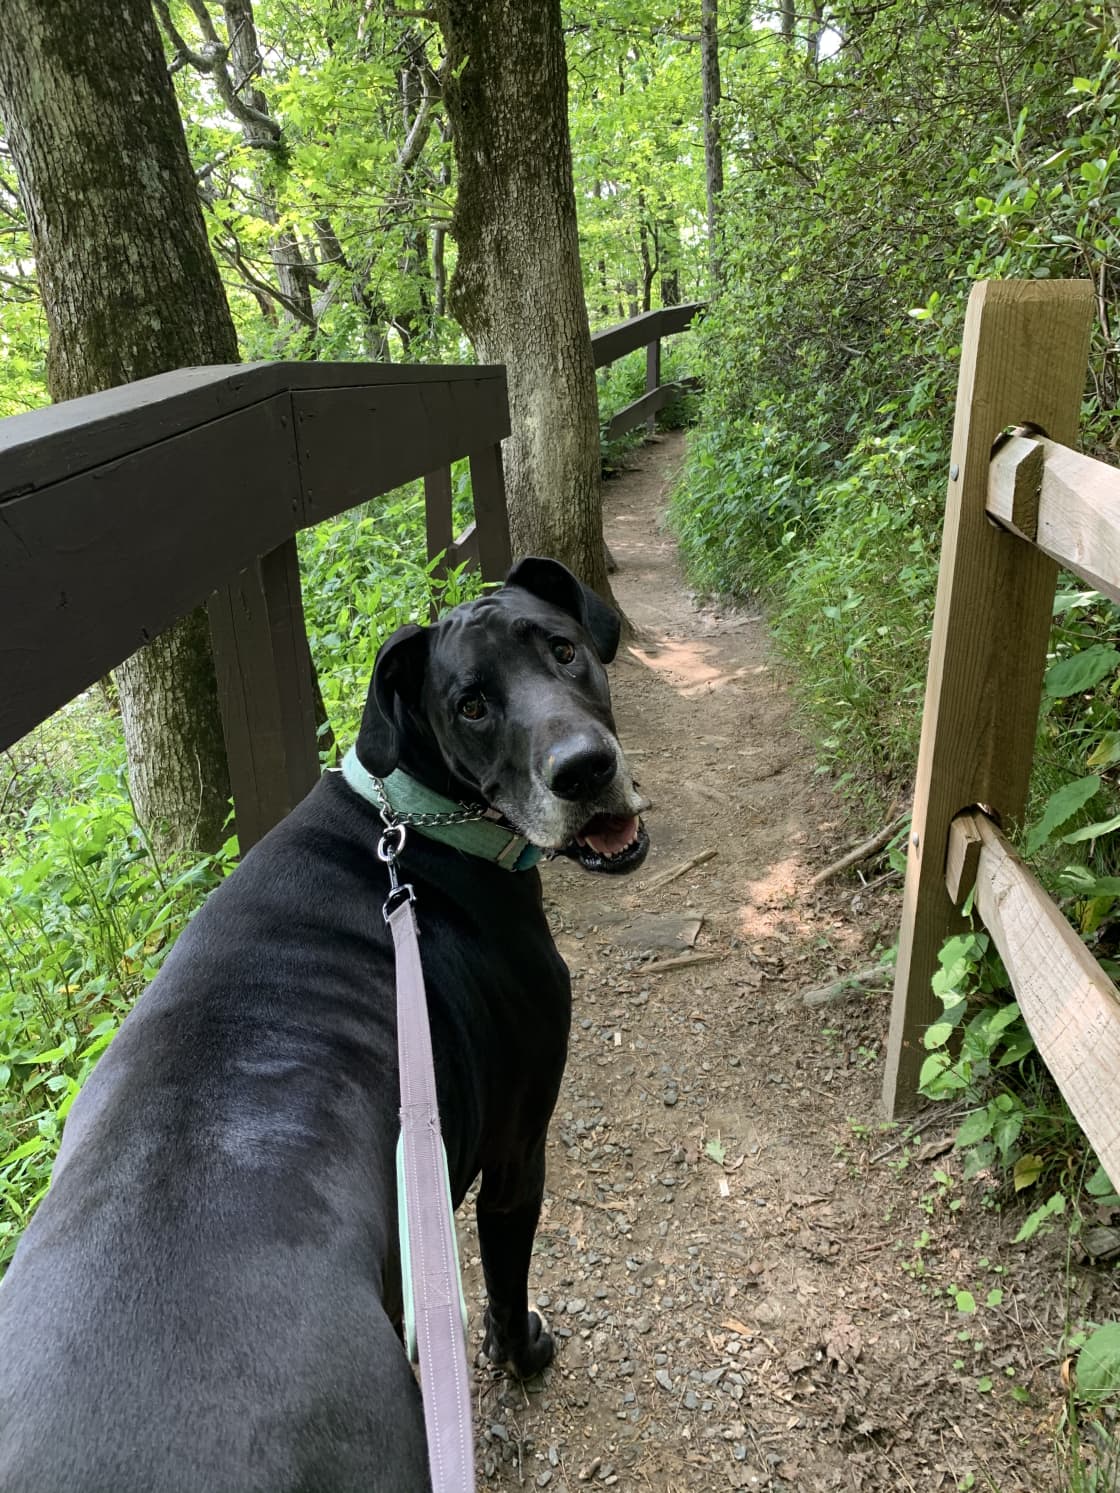 We took the dog for a little hike at nearby 
( maybe an hour?) Caesar’s Head Park to explore the areas 